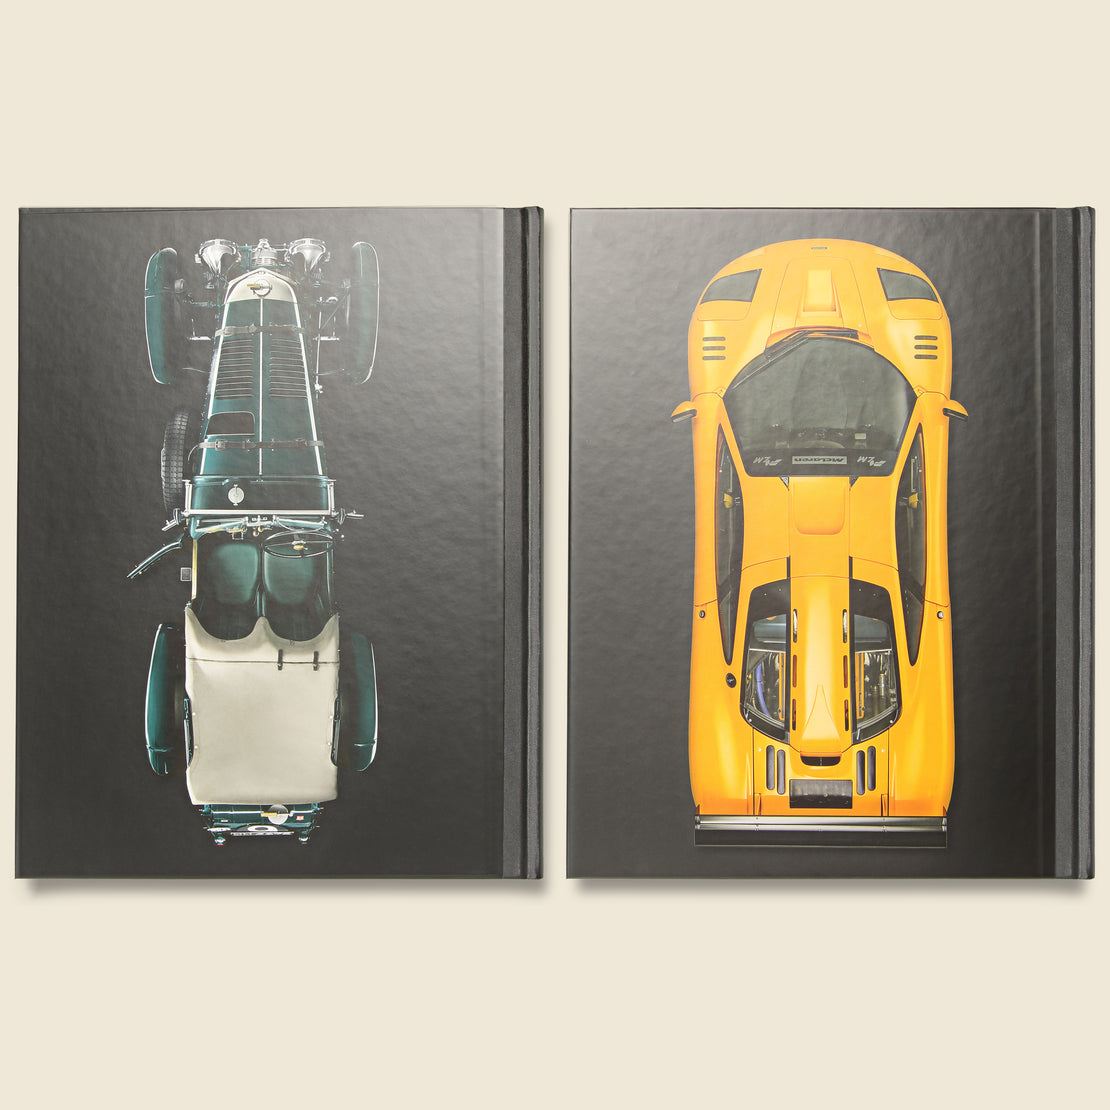 Ultimate Collector Cars - Bookstore - STAG Provisions - Home - Library - Book